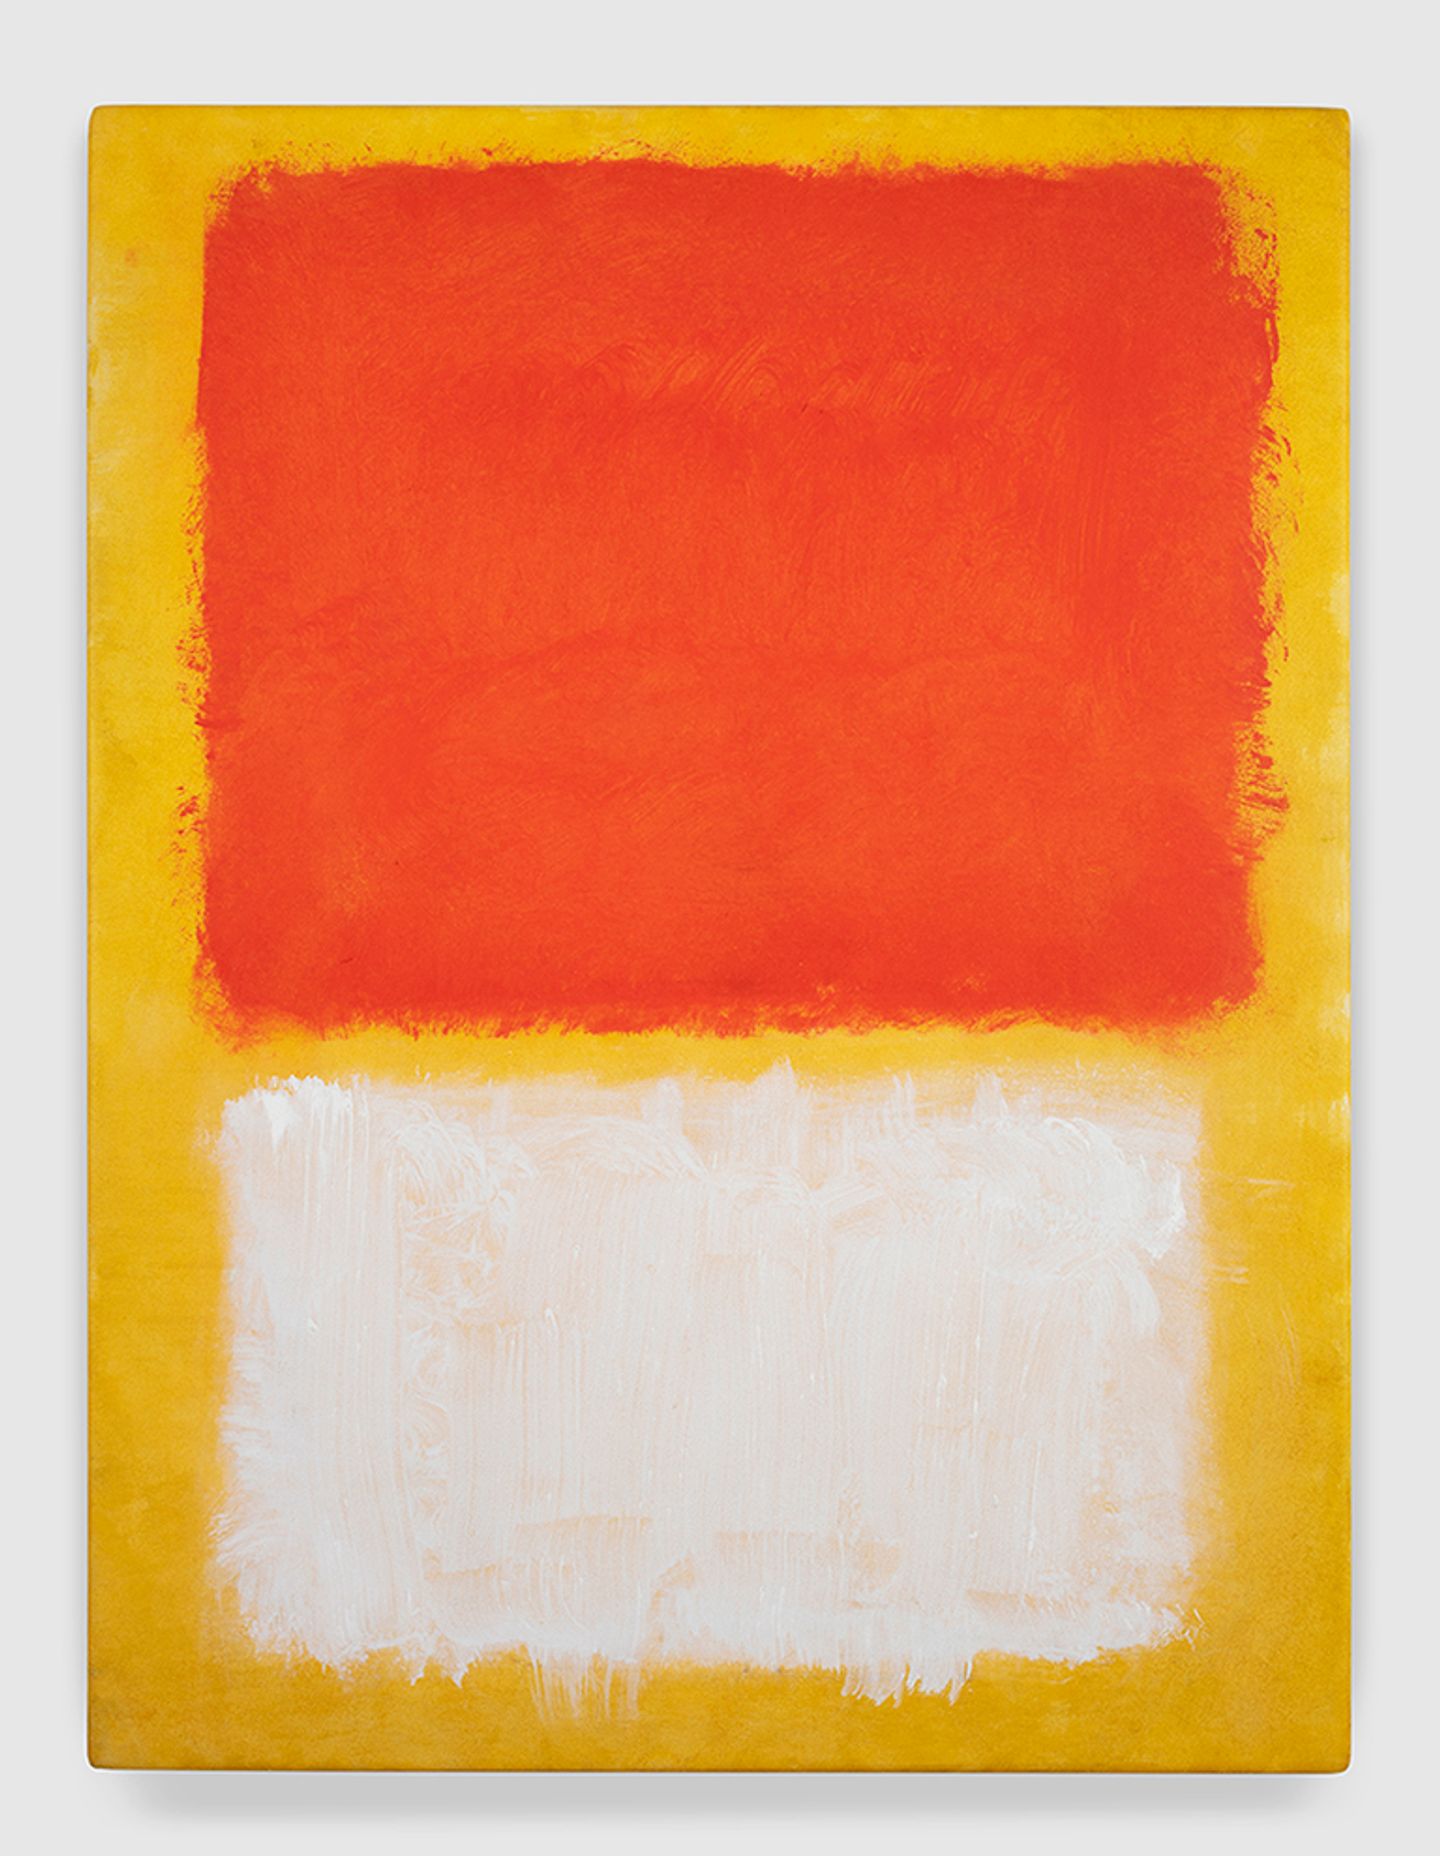 Mark Rothko, Untitled (1968). Acrylic on paper mounted on panel. 60.5 cm x 45.7 cm.  Private collection. © Kate Rothko Prizel and Christopher Rothko. Courtesy Pace Gallery.